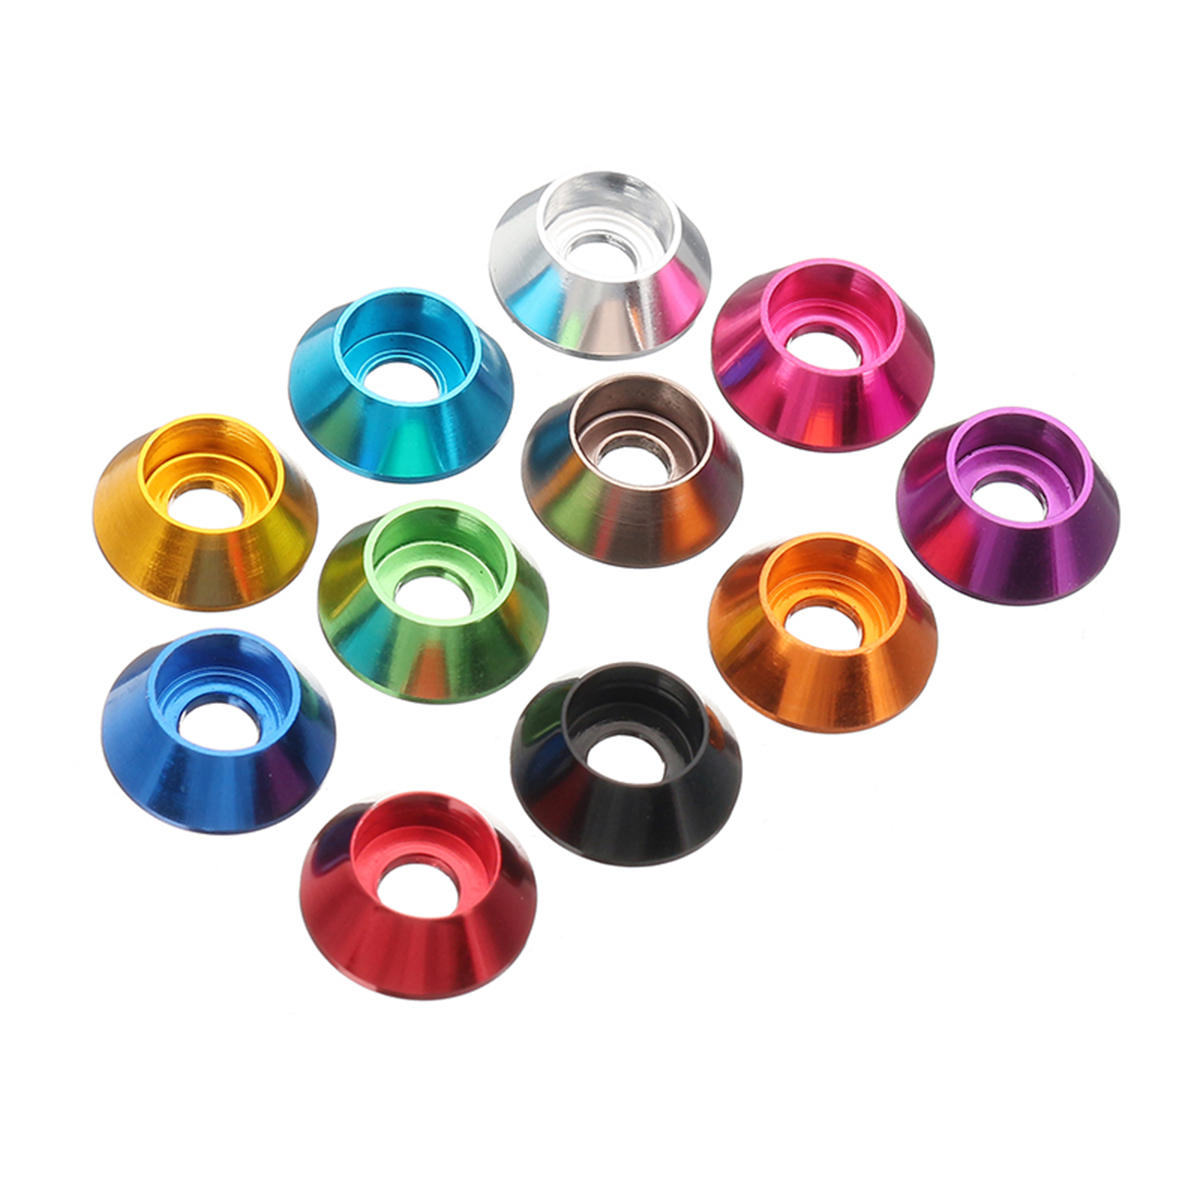 Suleve M2.5AN1 10Pcs M2.5 Cup Head Hex Screw Gasket Washer Nuts Aluminum Alloy Multicolor